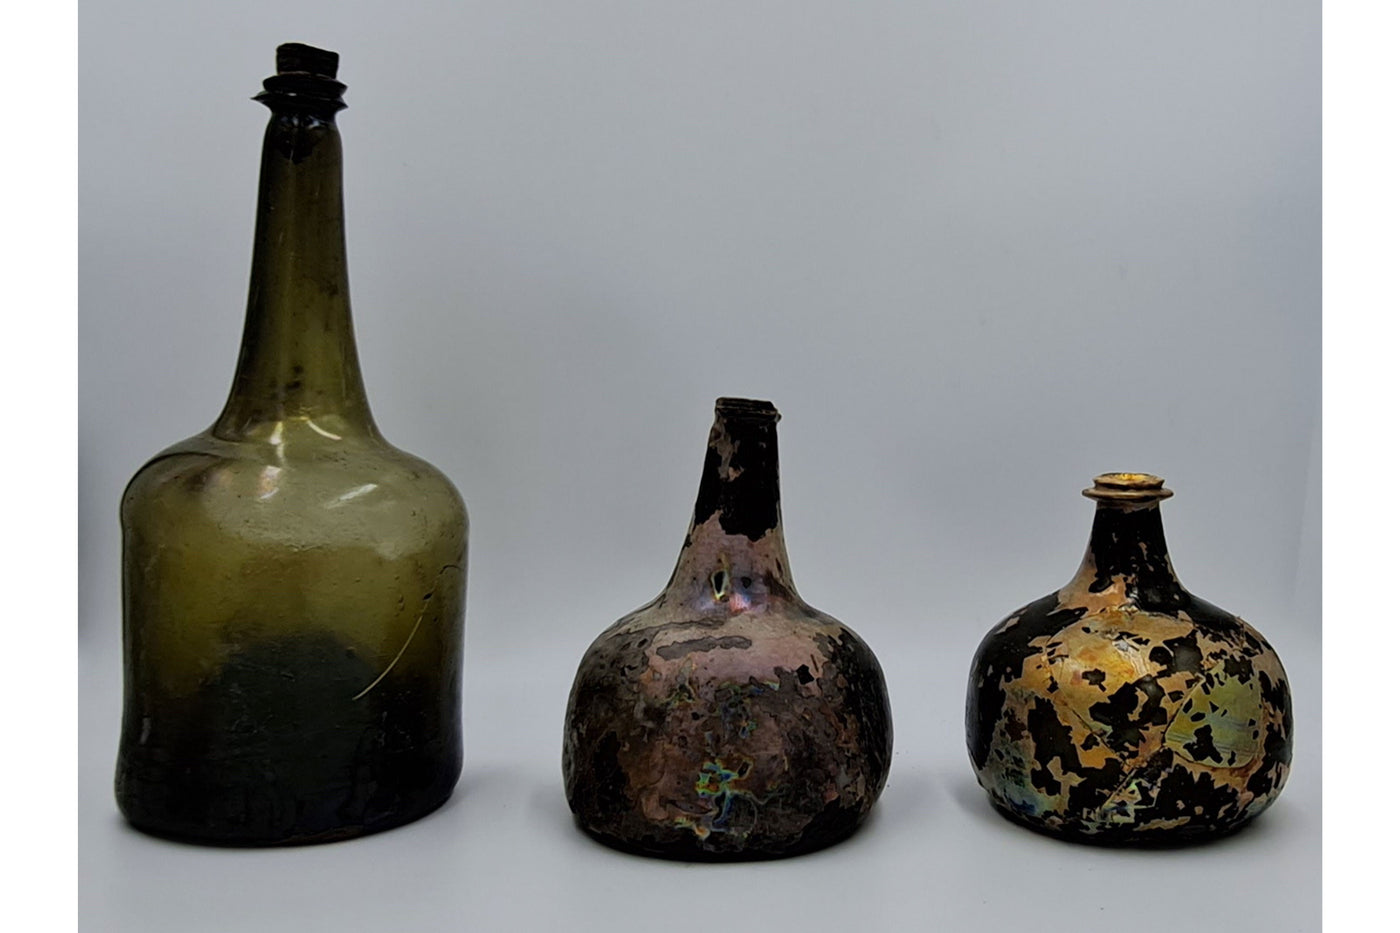 Three old bottles that Nicola White has found on the River Thames